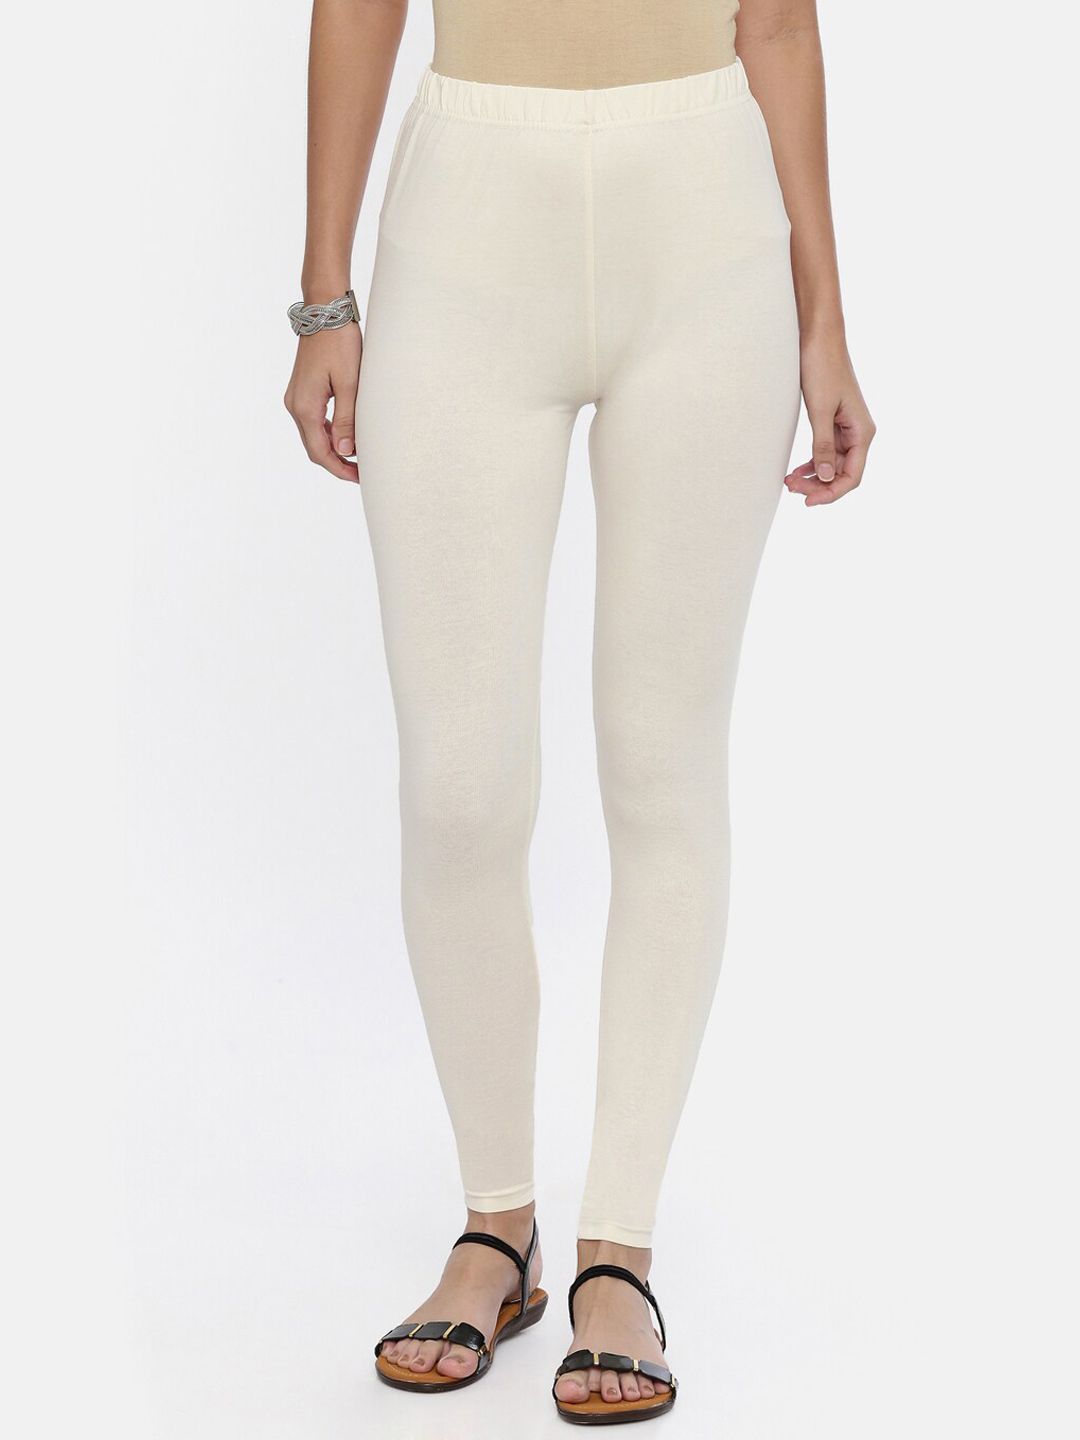 Souchii Women Cream-Coloured Solid Ankle-Length Leggings Price in India